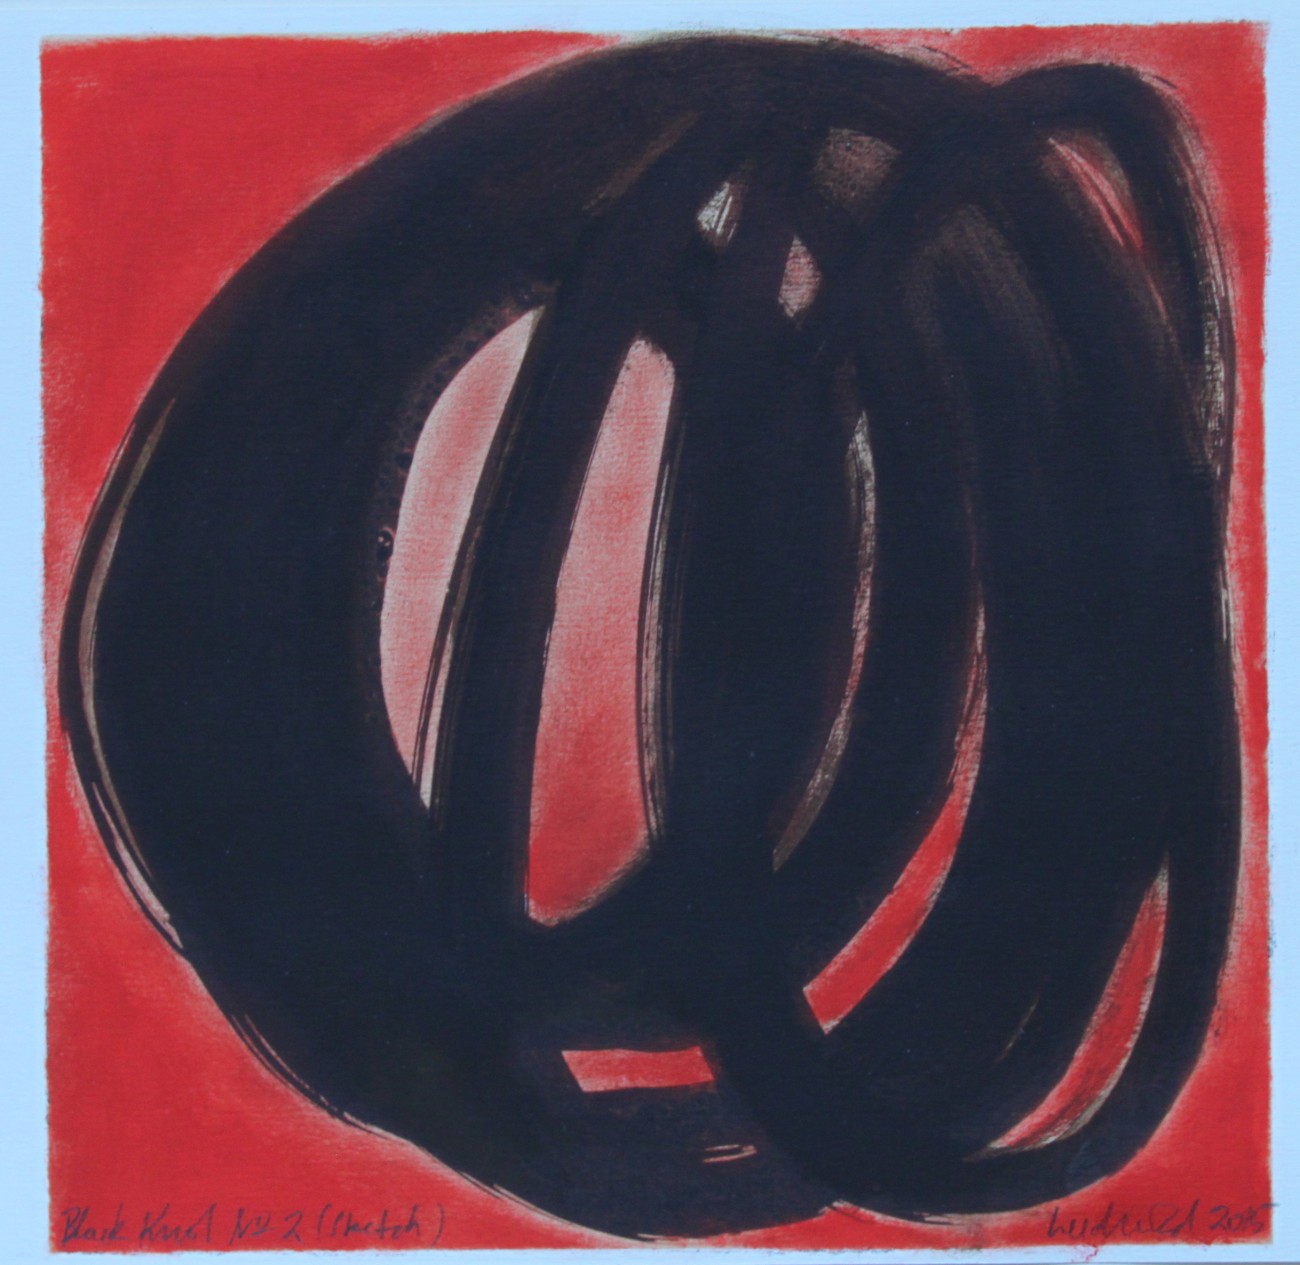 Wolfgang Leidhold, Black Knot No 2 [sketch], Acrylic, ink and oil on paper, 13 × 13 inch, 2014 - Acryl, Tinte und Öl auf Papier, 33 × 33 cm, 2014